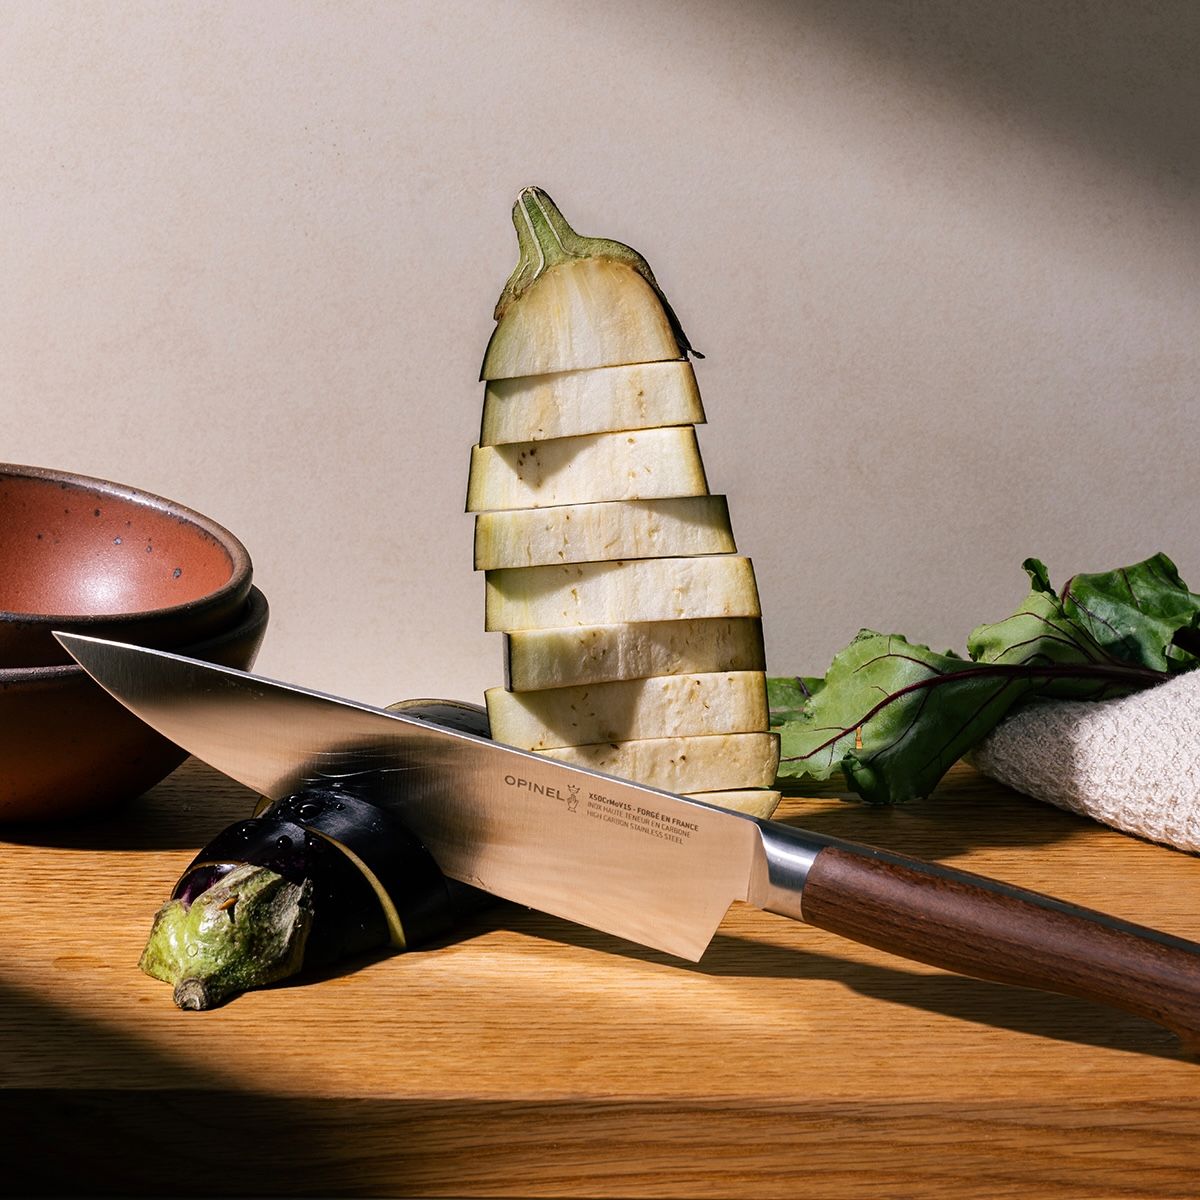 A chef's knife is propped up on a cutting board with slices of eggplant next to the blade and towered behind. The knife has a sharp steel blade with a beveled dark wood handle